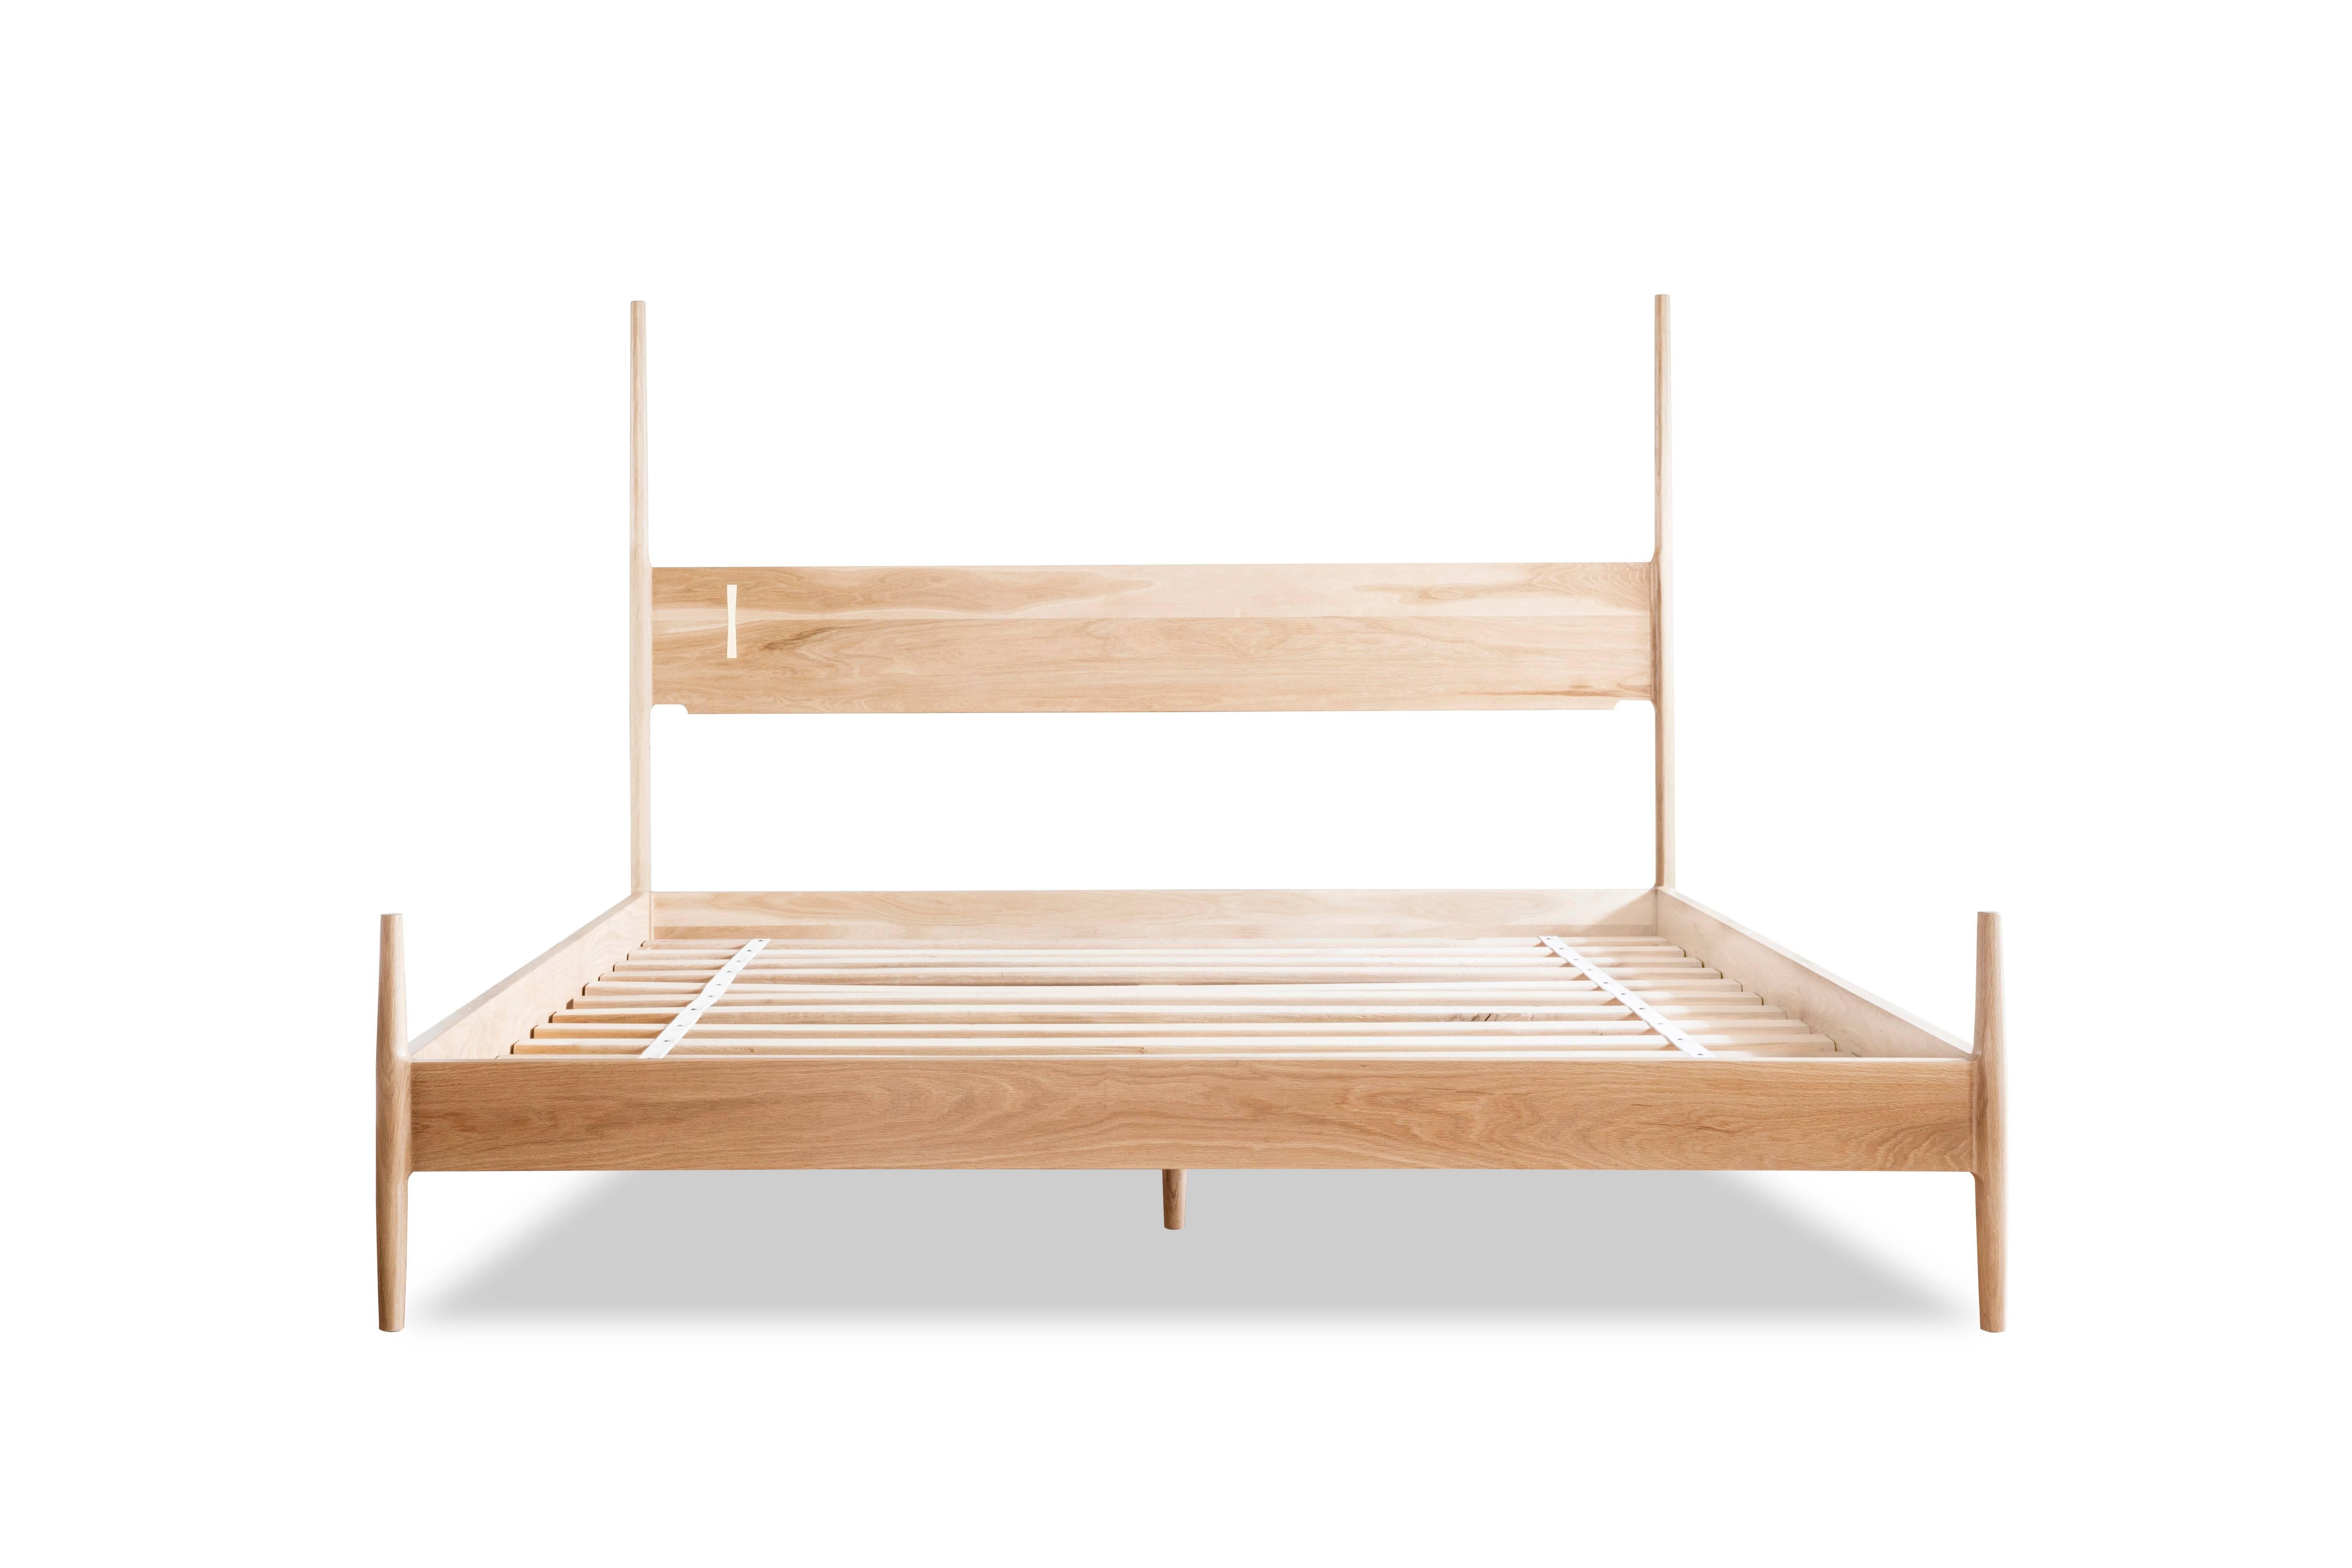 Posted bed with solid wood construction, hand-cut joinery and custom Dutchman brass joint. Handmade in Los Angeles, California.

Bed frame available in King or Queen, inquire for other mattress sizes.

As shown in natural oak.
Wood type is